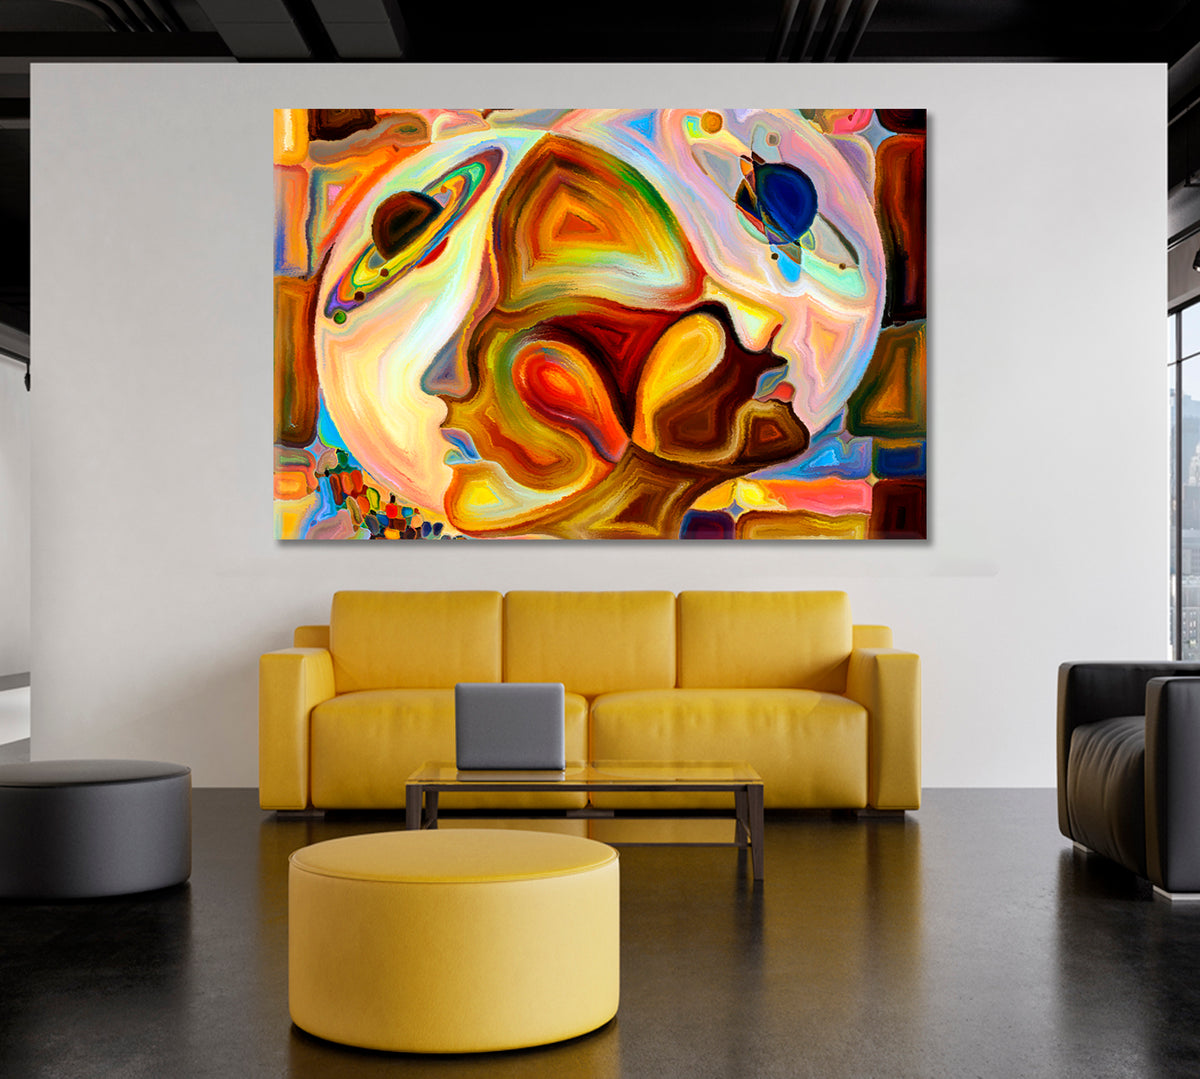 Looking Into Each Other Celestial Home Canvas Décor Artesty 1 panel 24" x 16" 